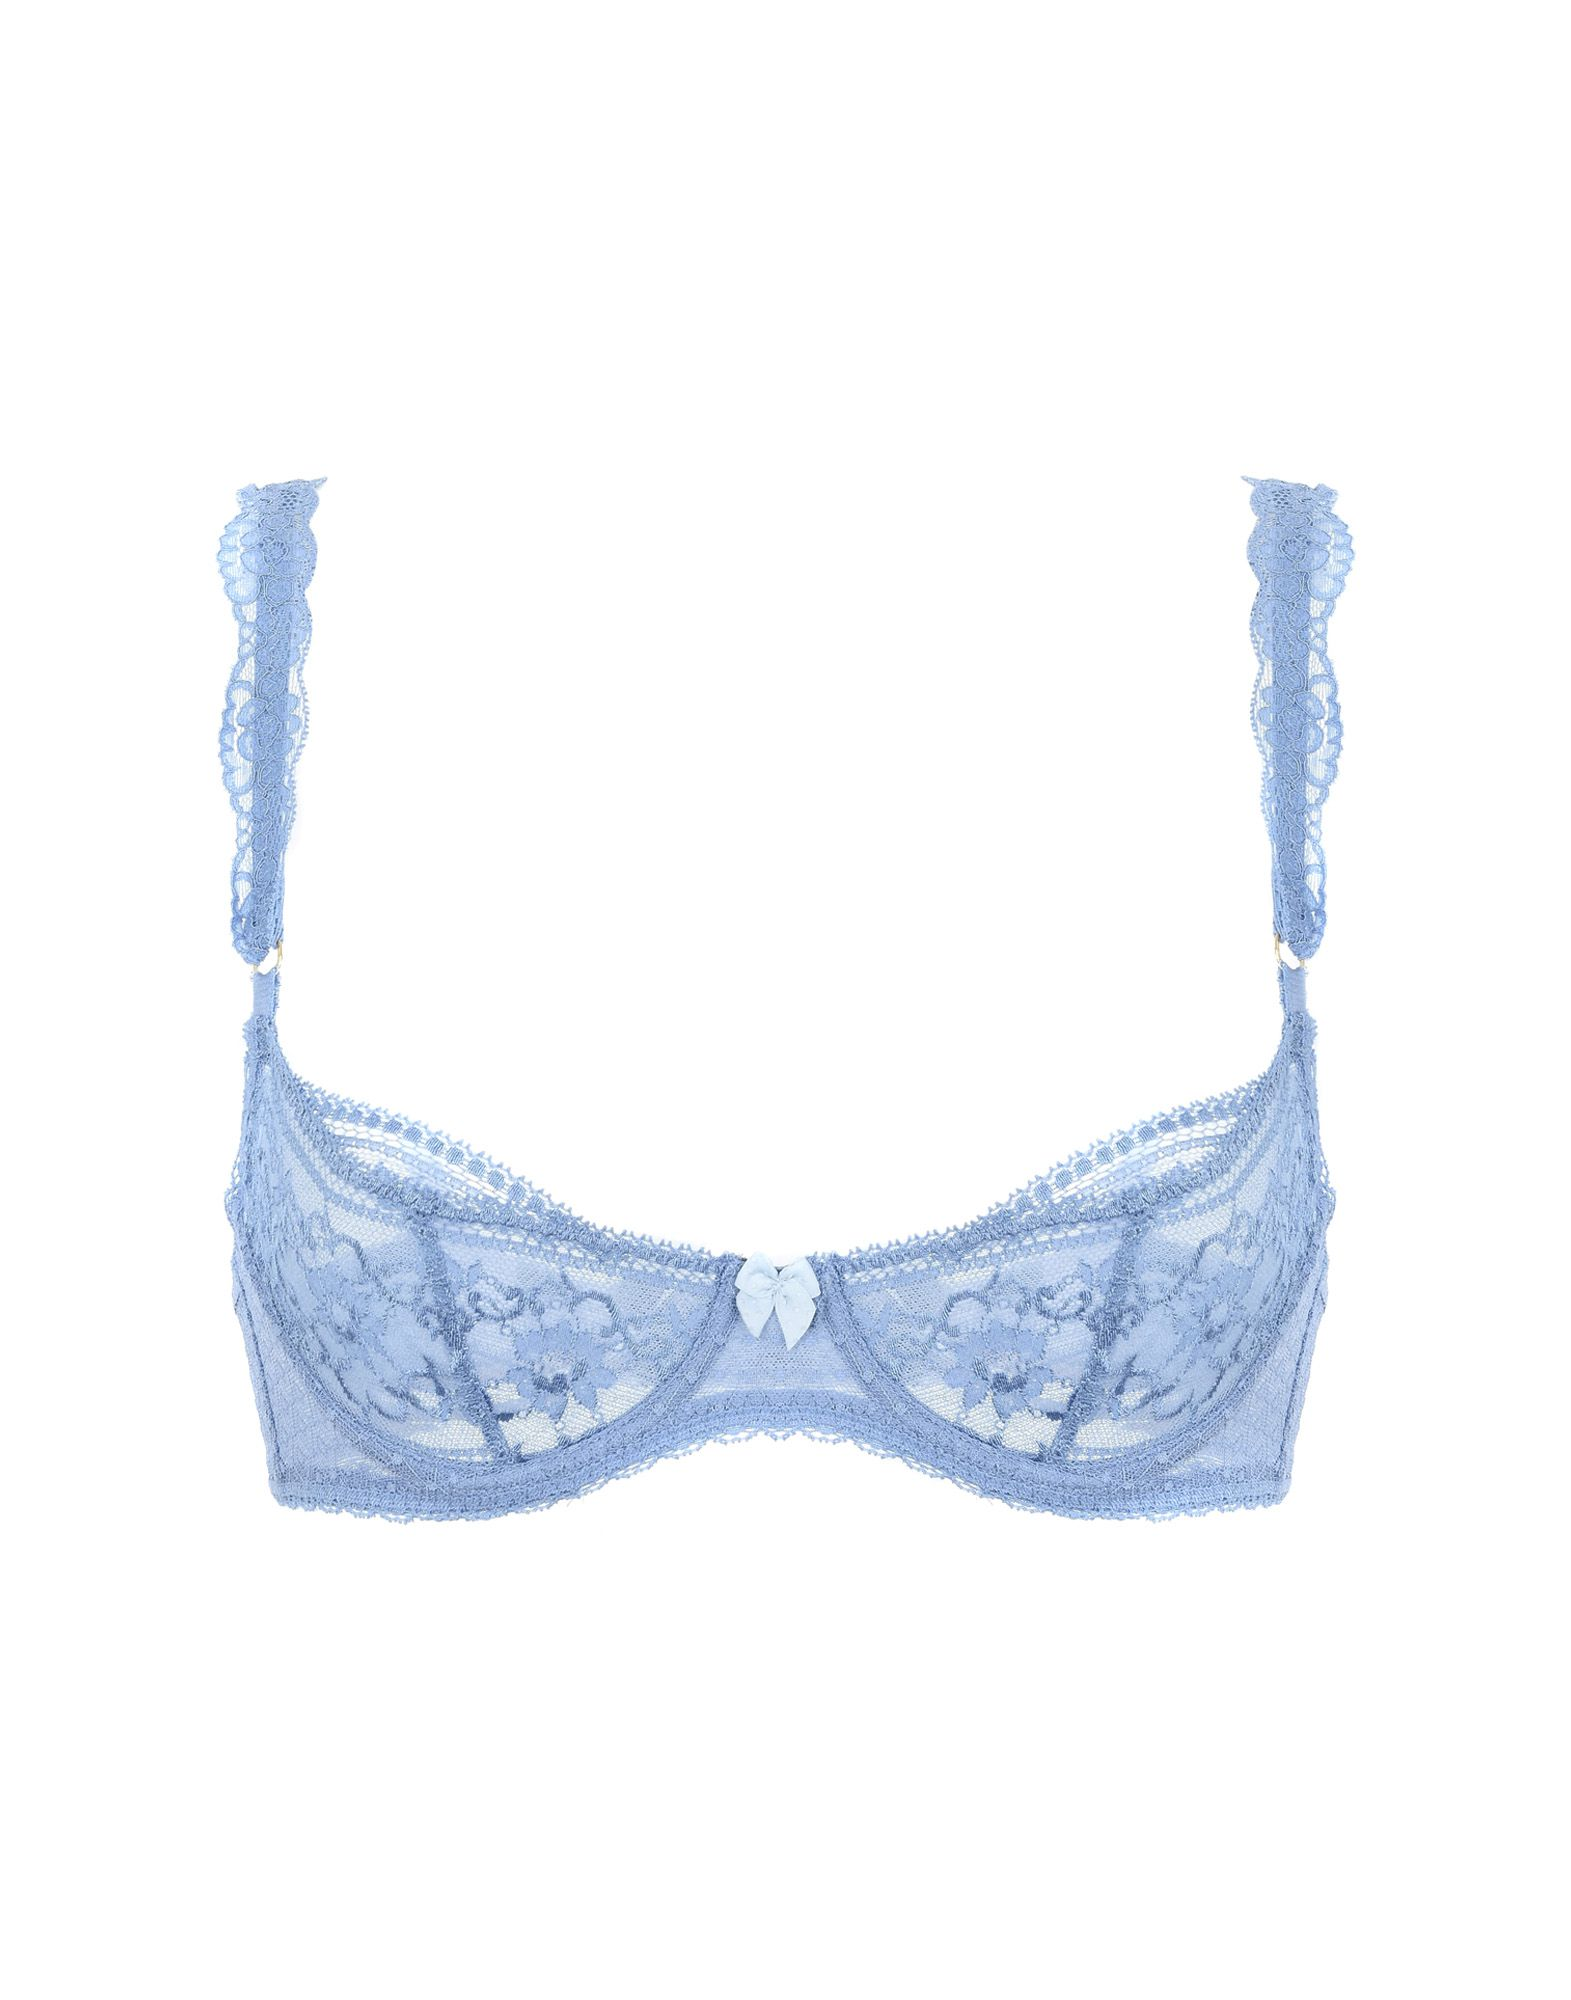 bare some skin this valentine’s day with these 17 sheer bras